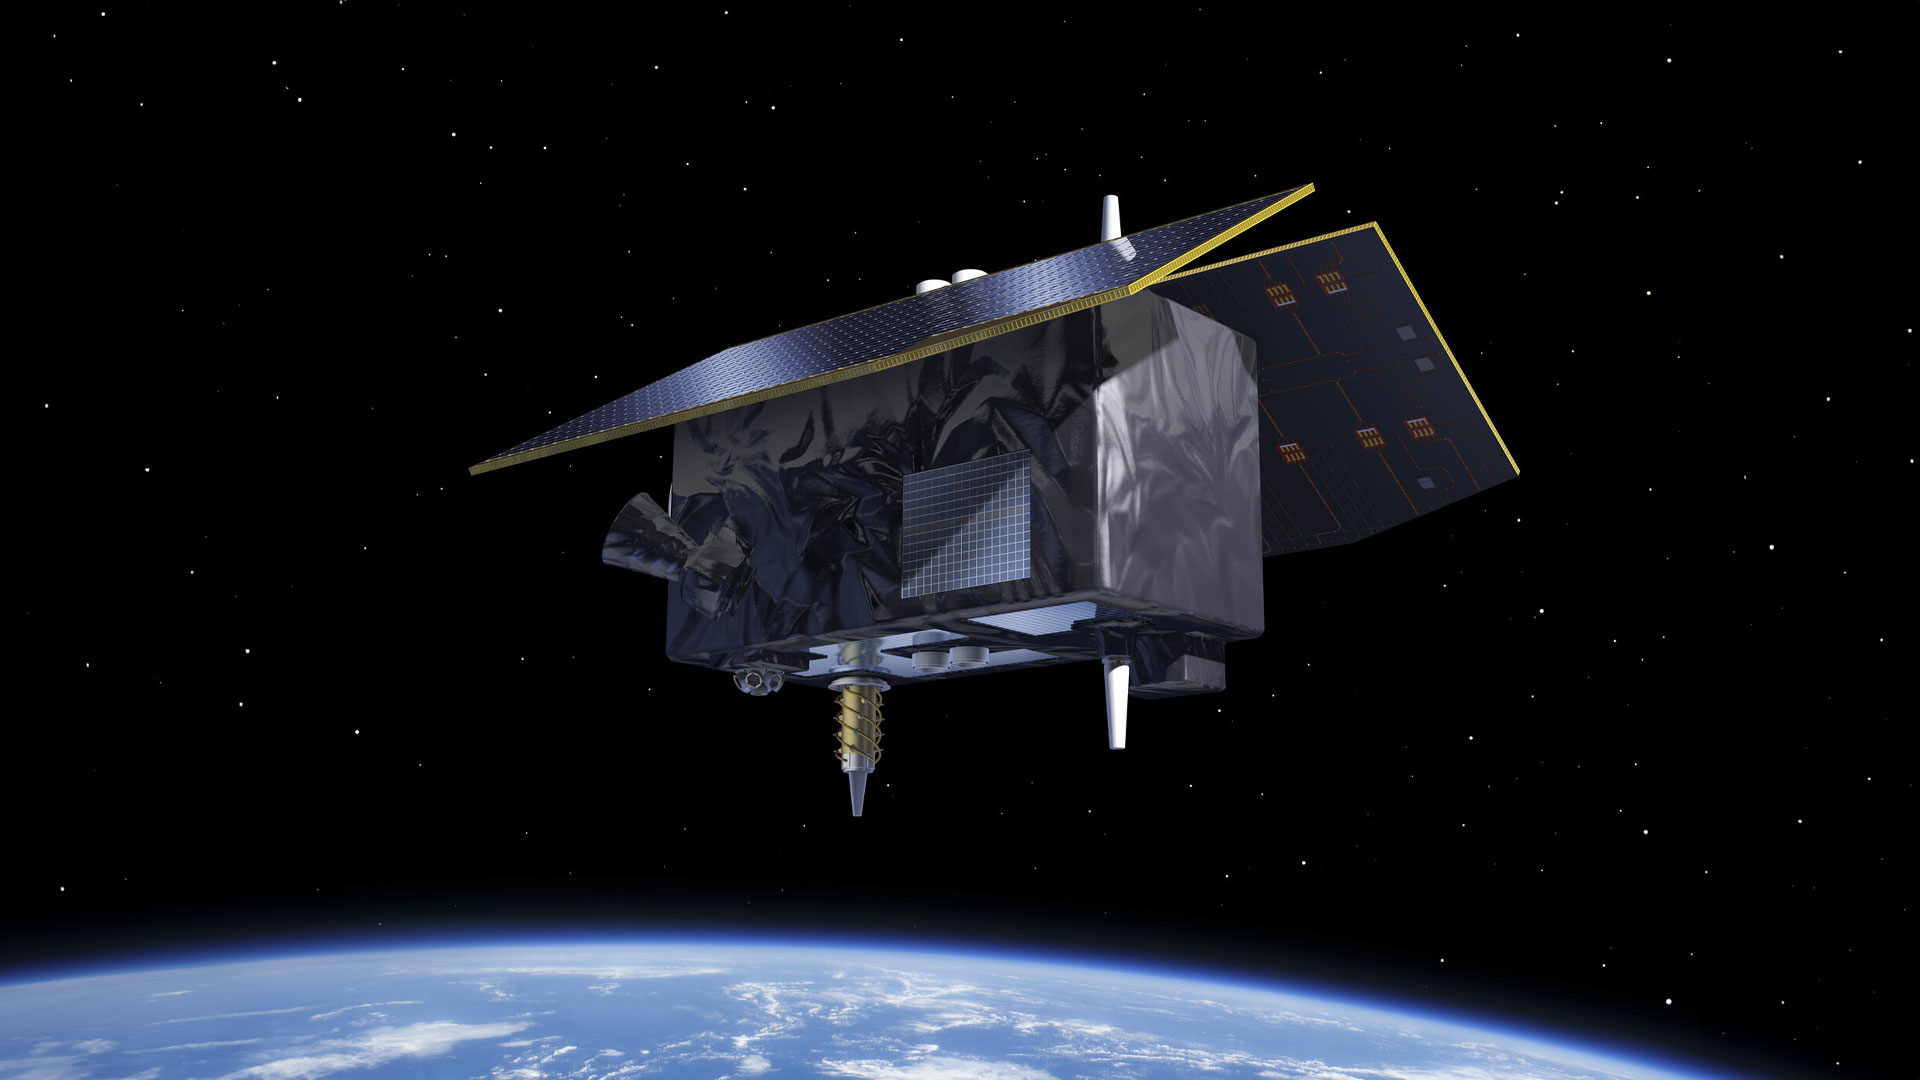 ESA has awarded €233.4 million in contracts for the development of the first two missions of its FutureNAV programme.